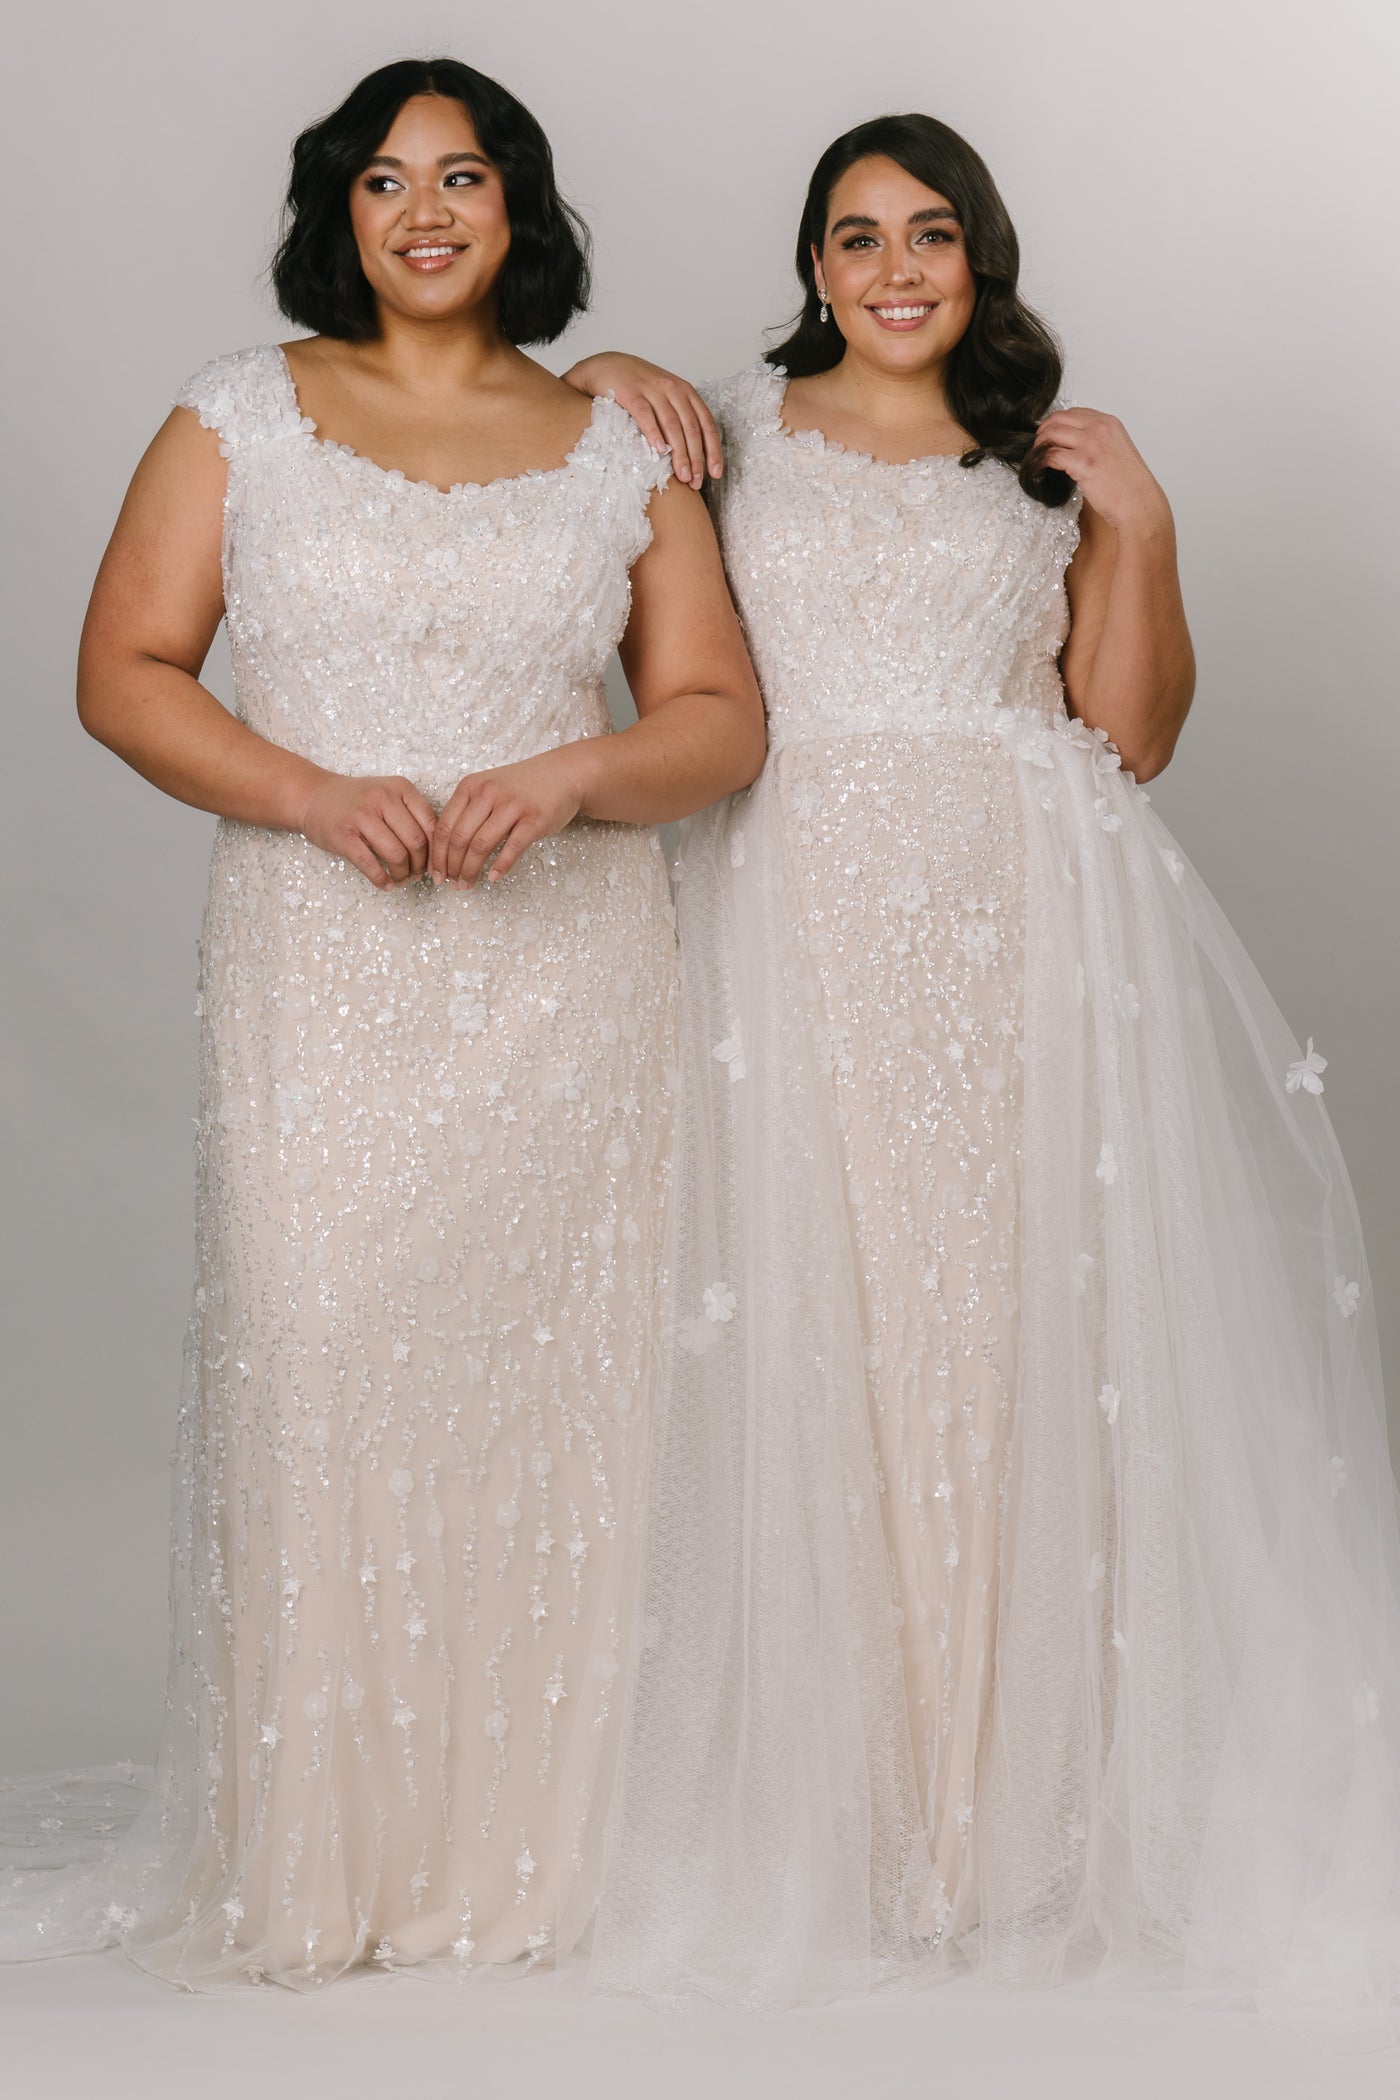 Two plus size models showcasing the dress on the left  is in size 18 and the model on the right has the overskirt and in a size 14.